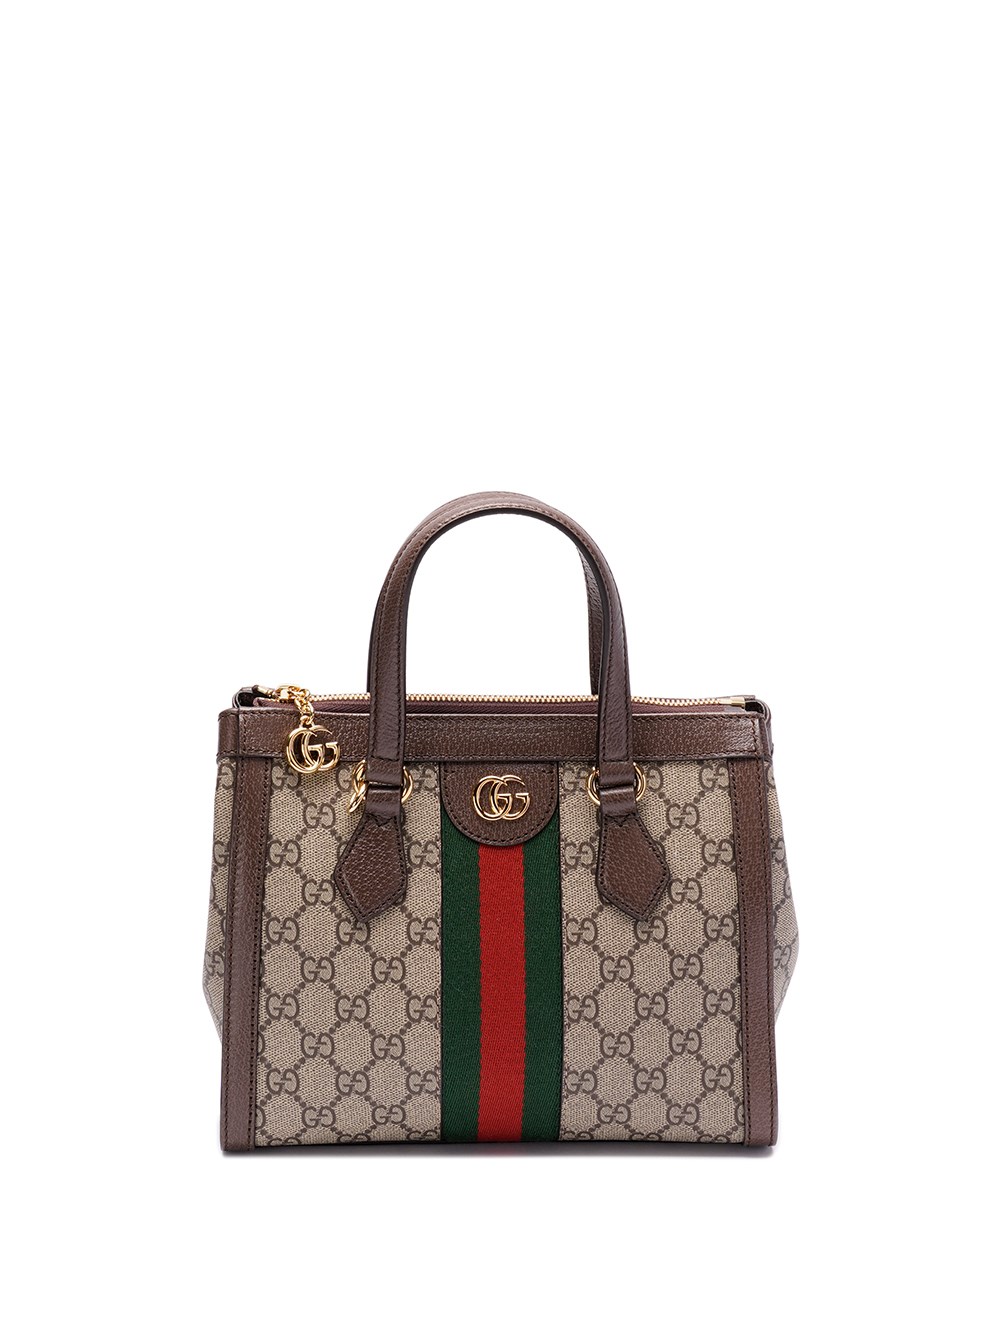 Gucci `ophidia Gg` Small Tote Bag In Brown